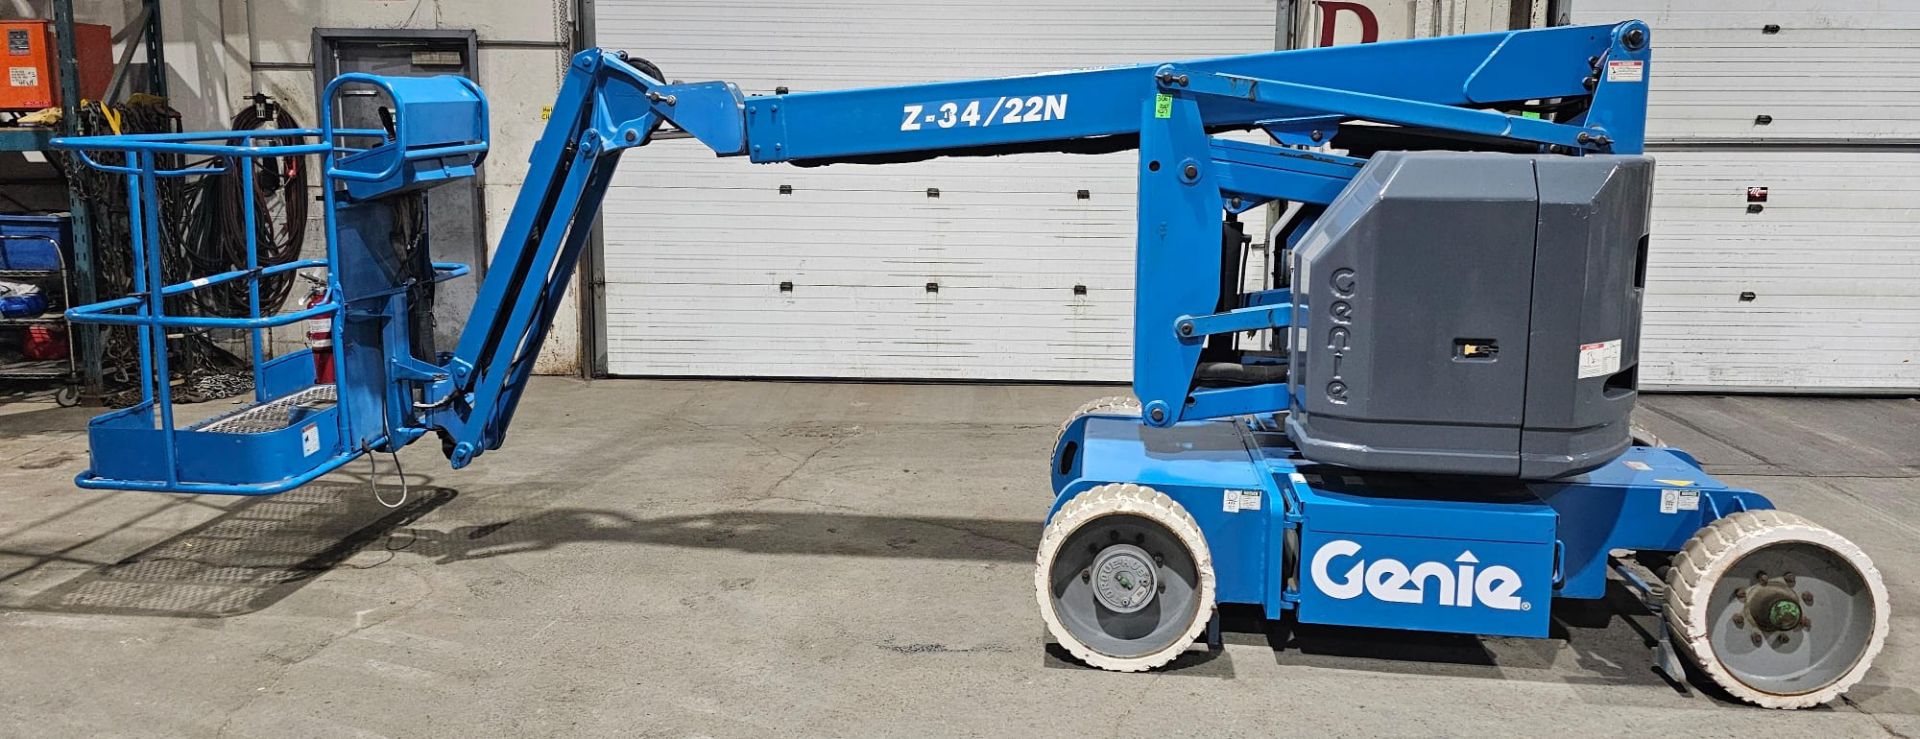 2007 Genie model Z-30-N Zoom Boom Electric Motorized Man Lift 30' Height & 21' Reach - with 24V - Image 9 of 9